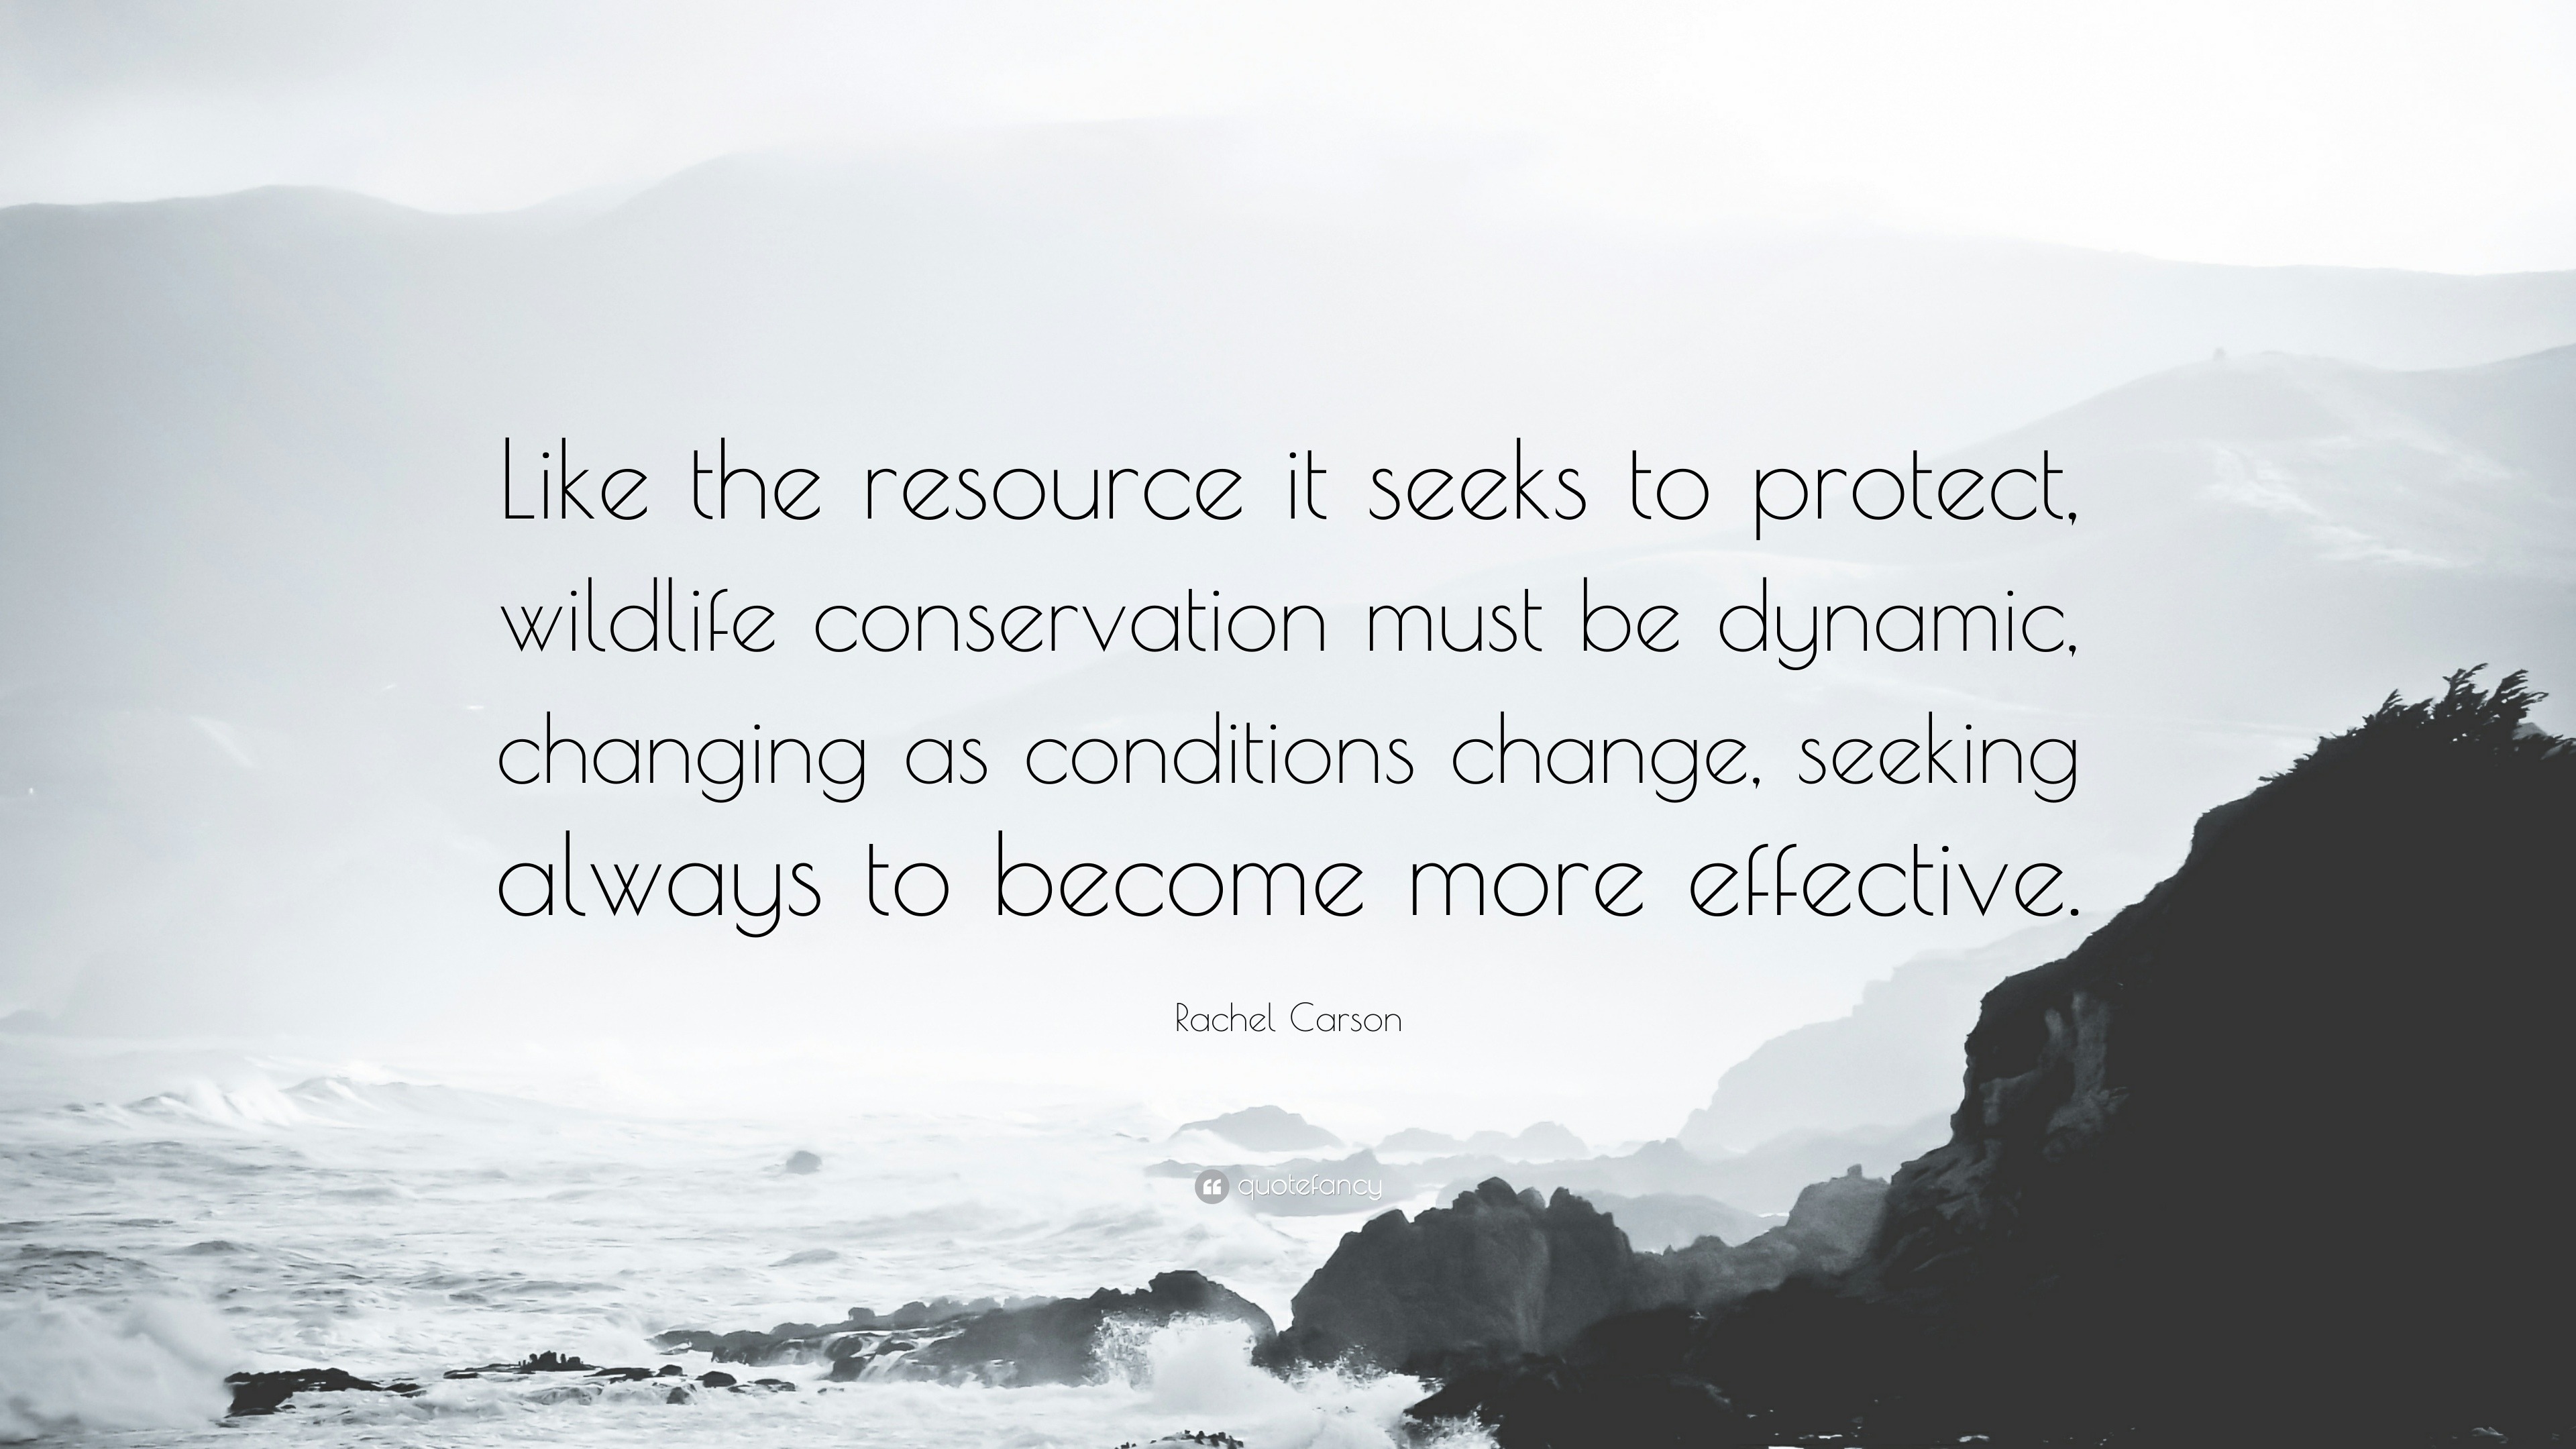 Rachel Carson Quote: “Like the resource it seeks to protect, wildlife